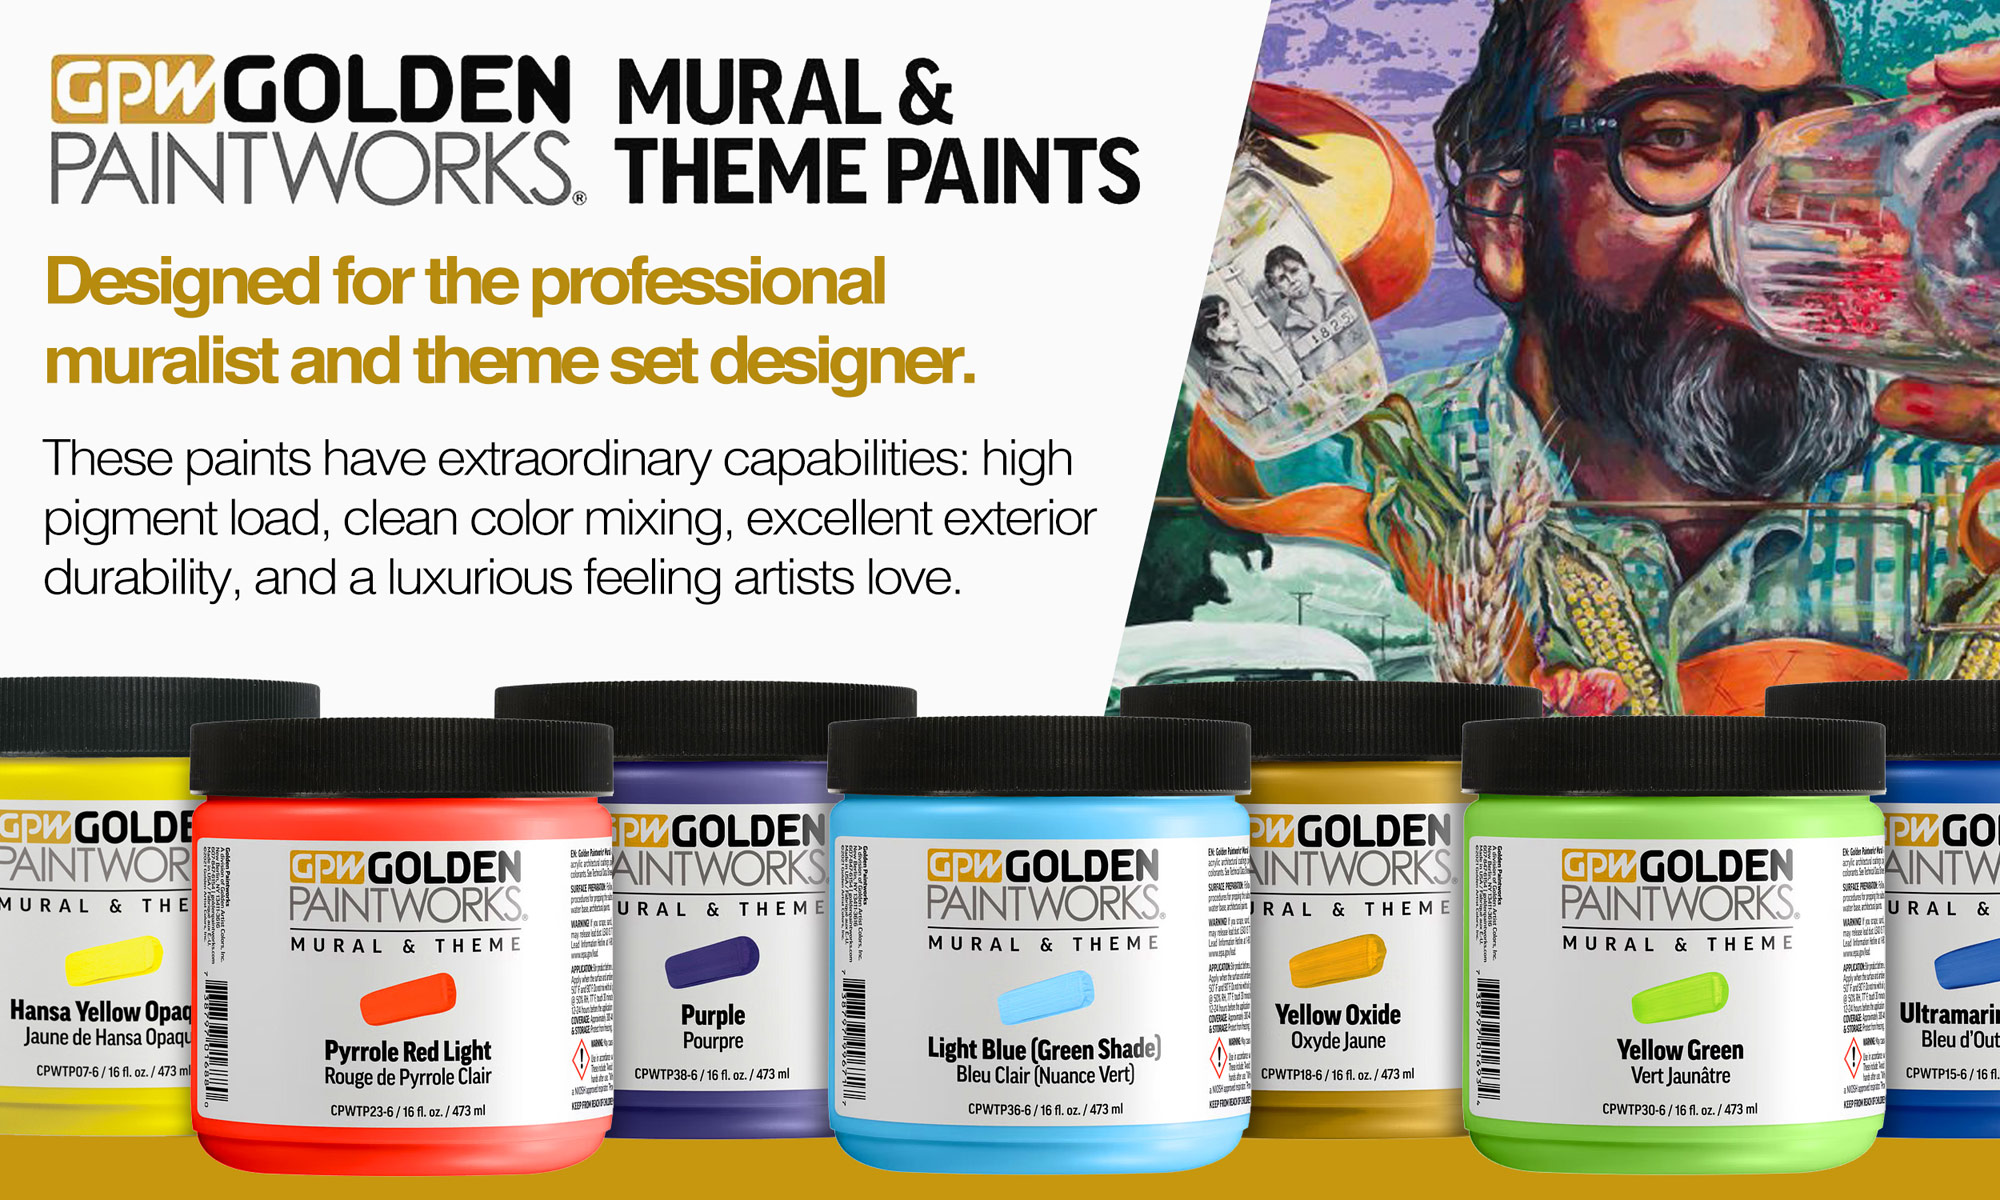 GPW Golden Paintworks Mural & Theme Paints. Designed for the professional muralist and theme set designer. These paints have extraordinary capabilities: high pigment load, clean color mixing, excellent exterior durability and a luxurious feeling artists love.